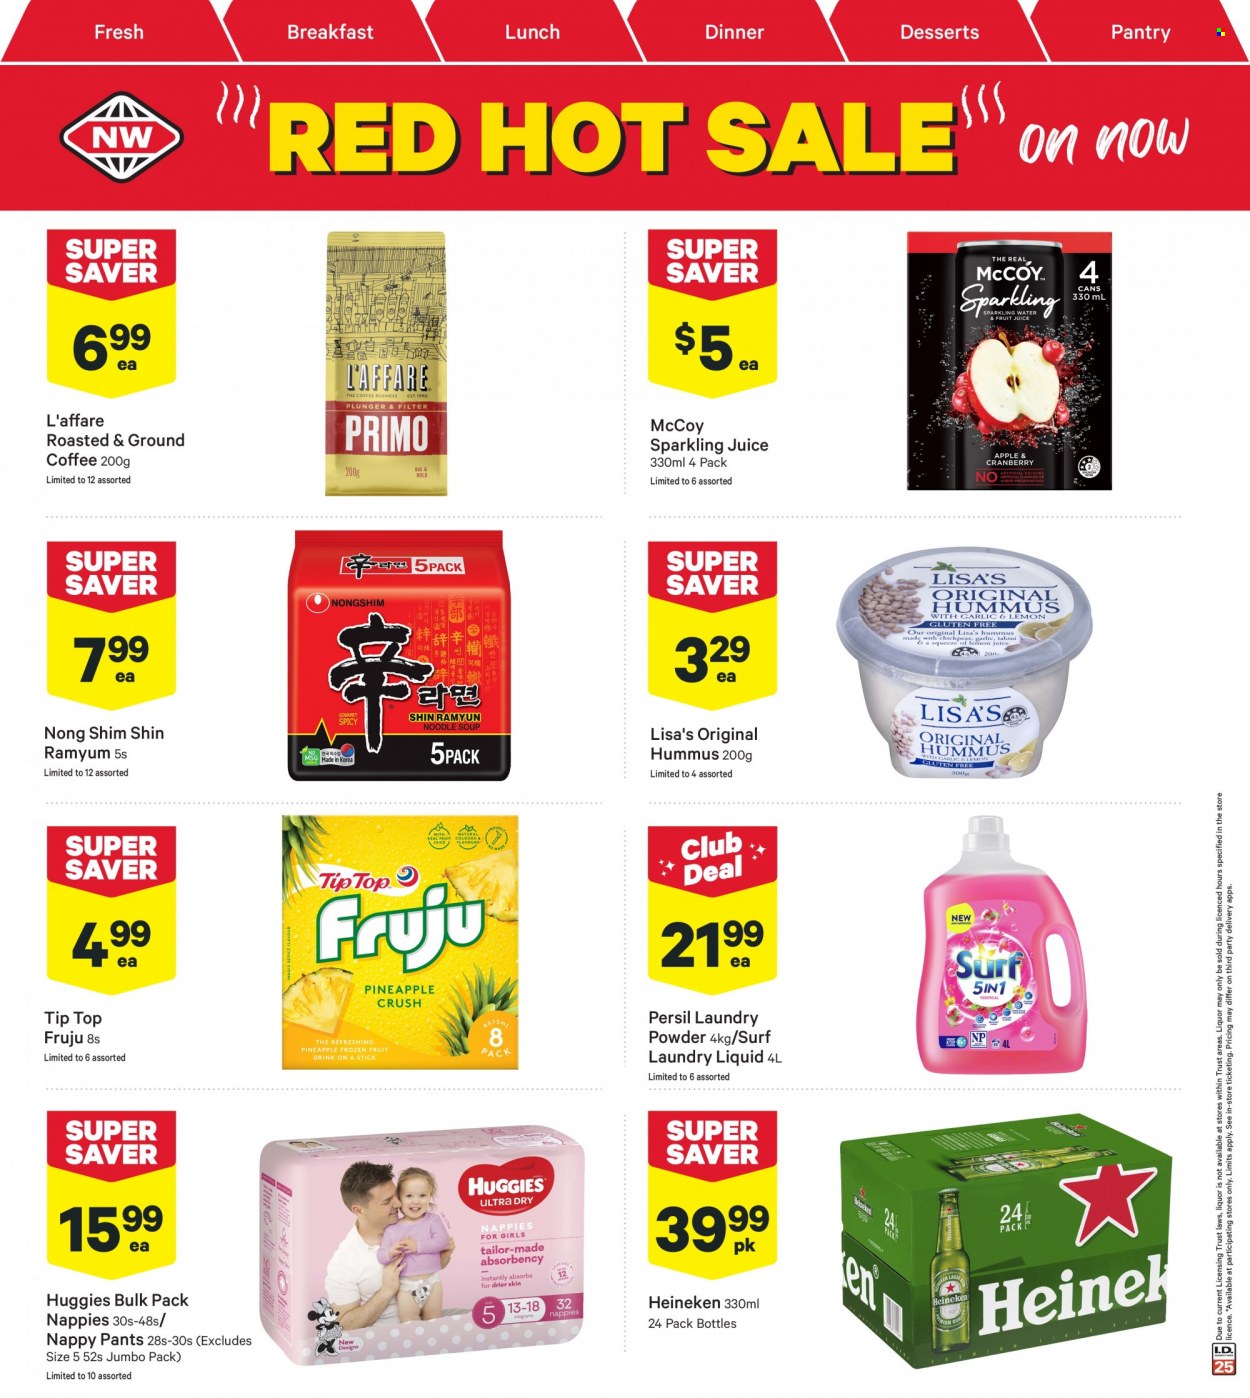 thumbnail - New World mailer - 23.01.2023 - 29.01.2023 - Sales products - Tip Top, hummus, juice, sparkling juice, coffee, ground coffee, beer, Heineken, Huggies, pants, nappies, Persil, laundry detergent, laundry powder, Surf. Page 3.